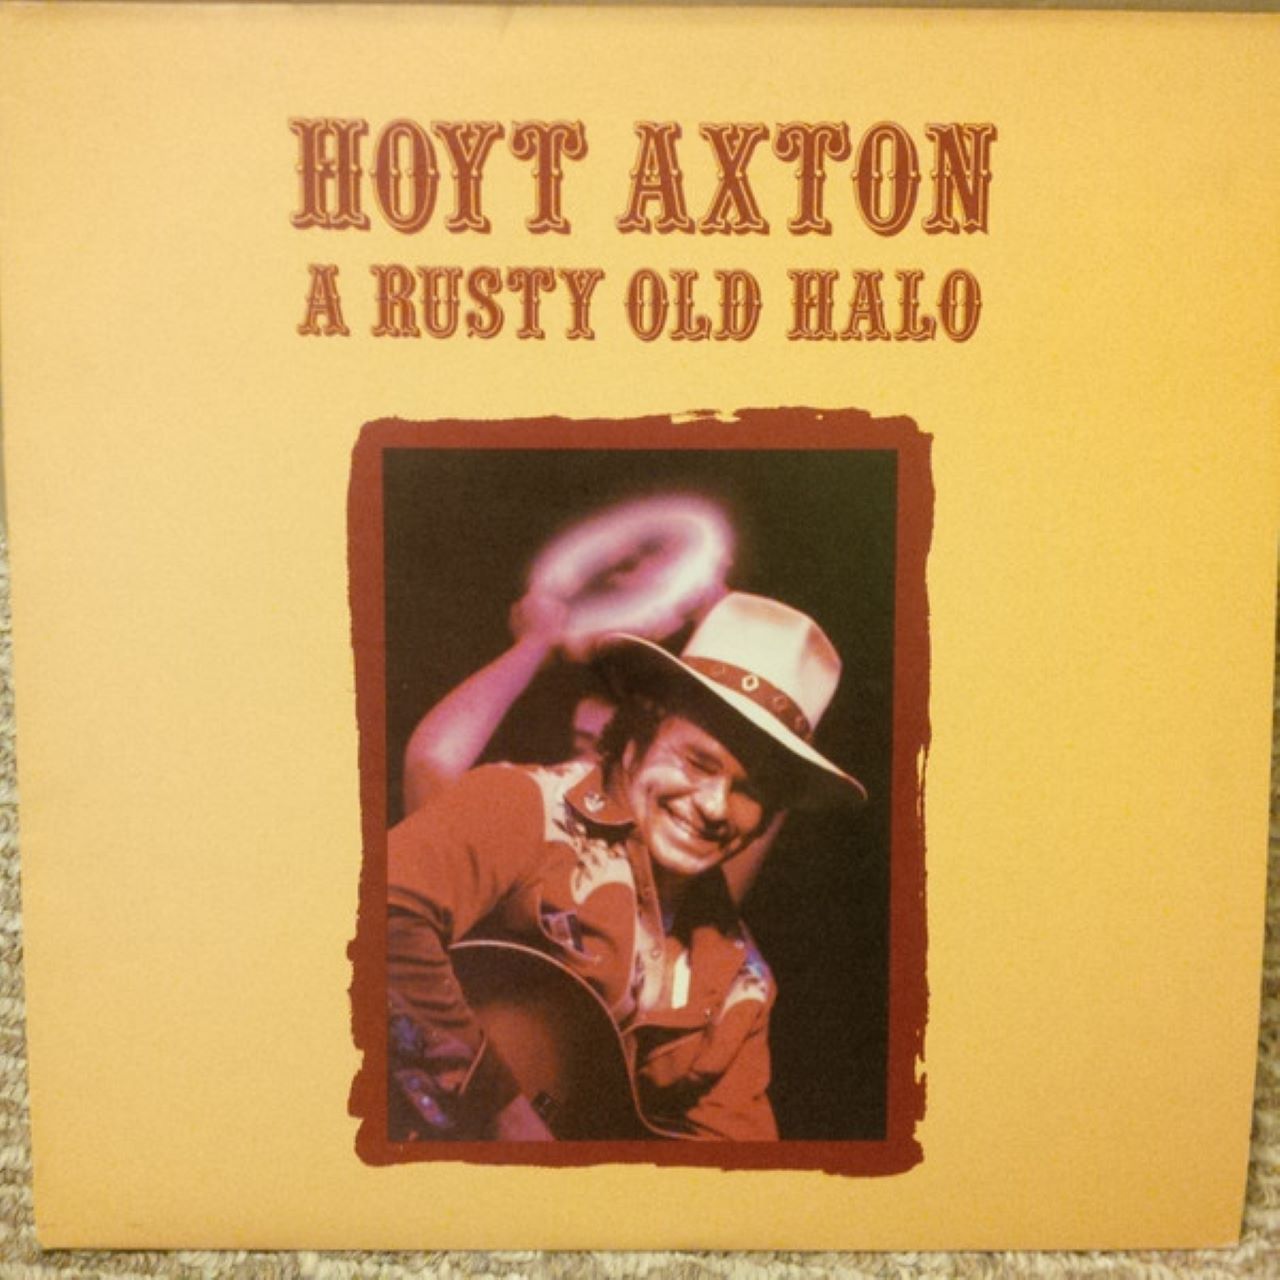 Hoyt Axton - A Rusty Old Halo cover album